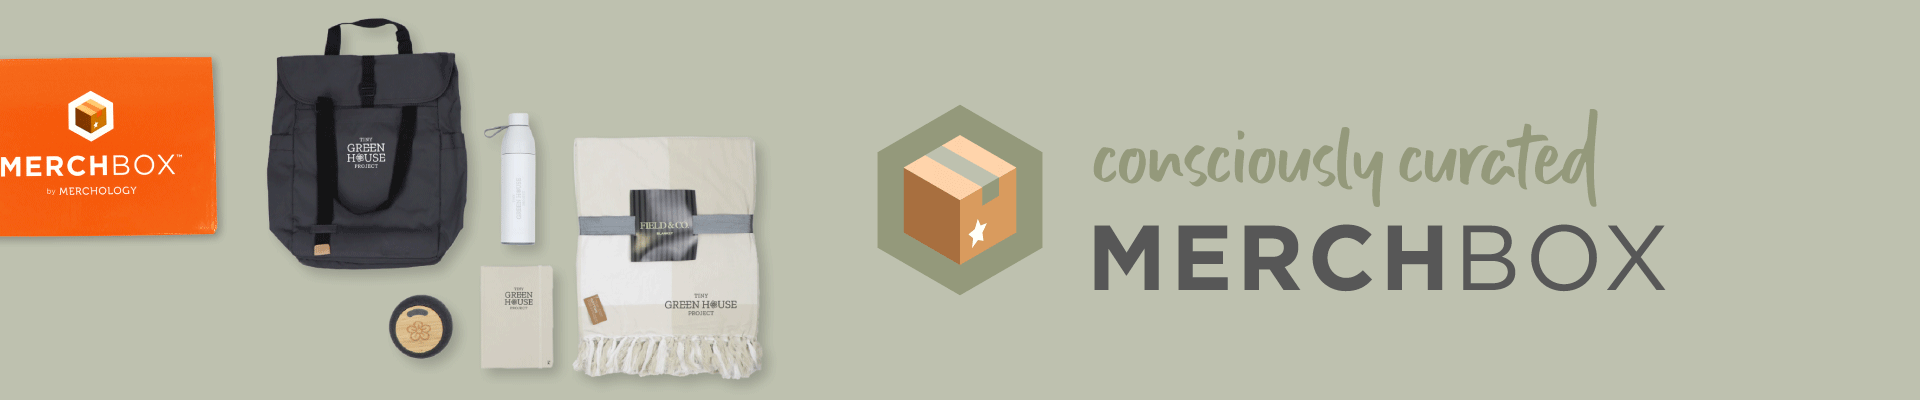 Consciously Curated MerchBox